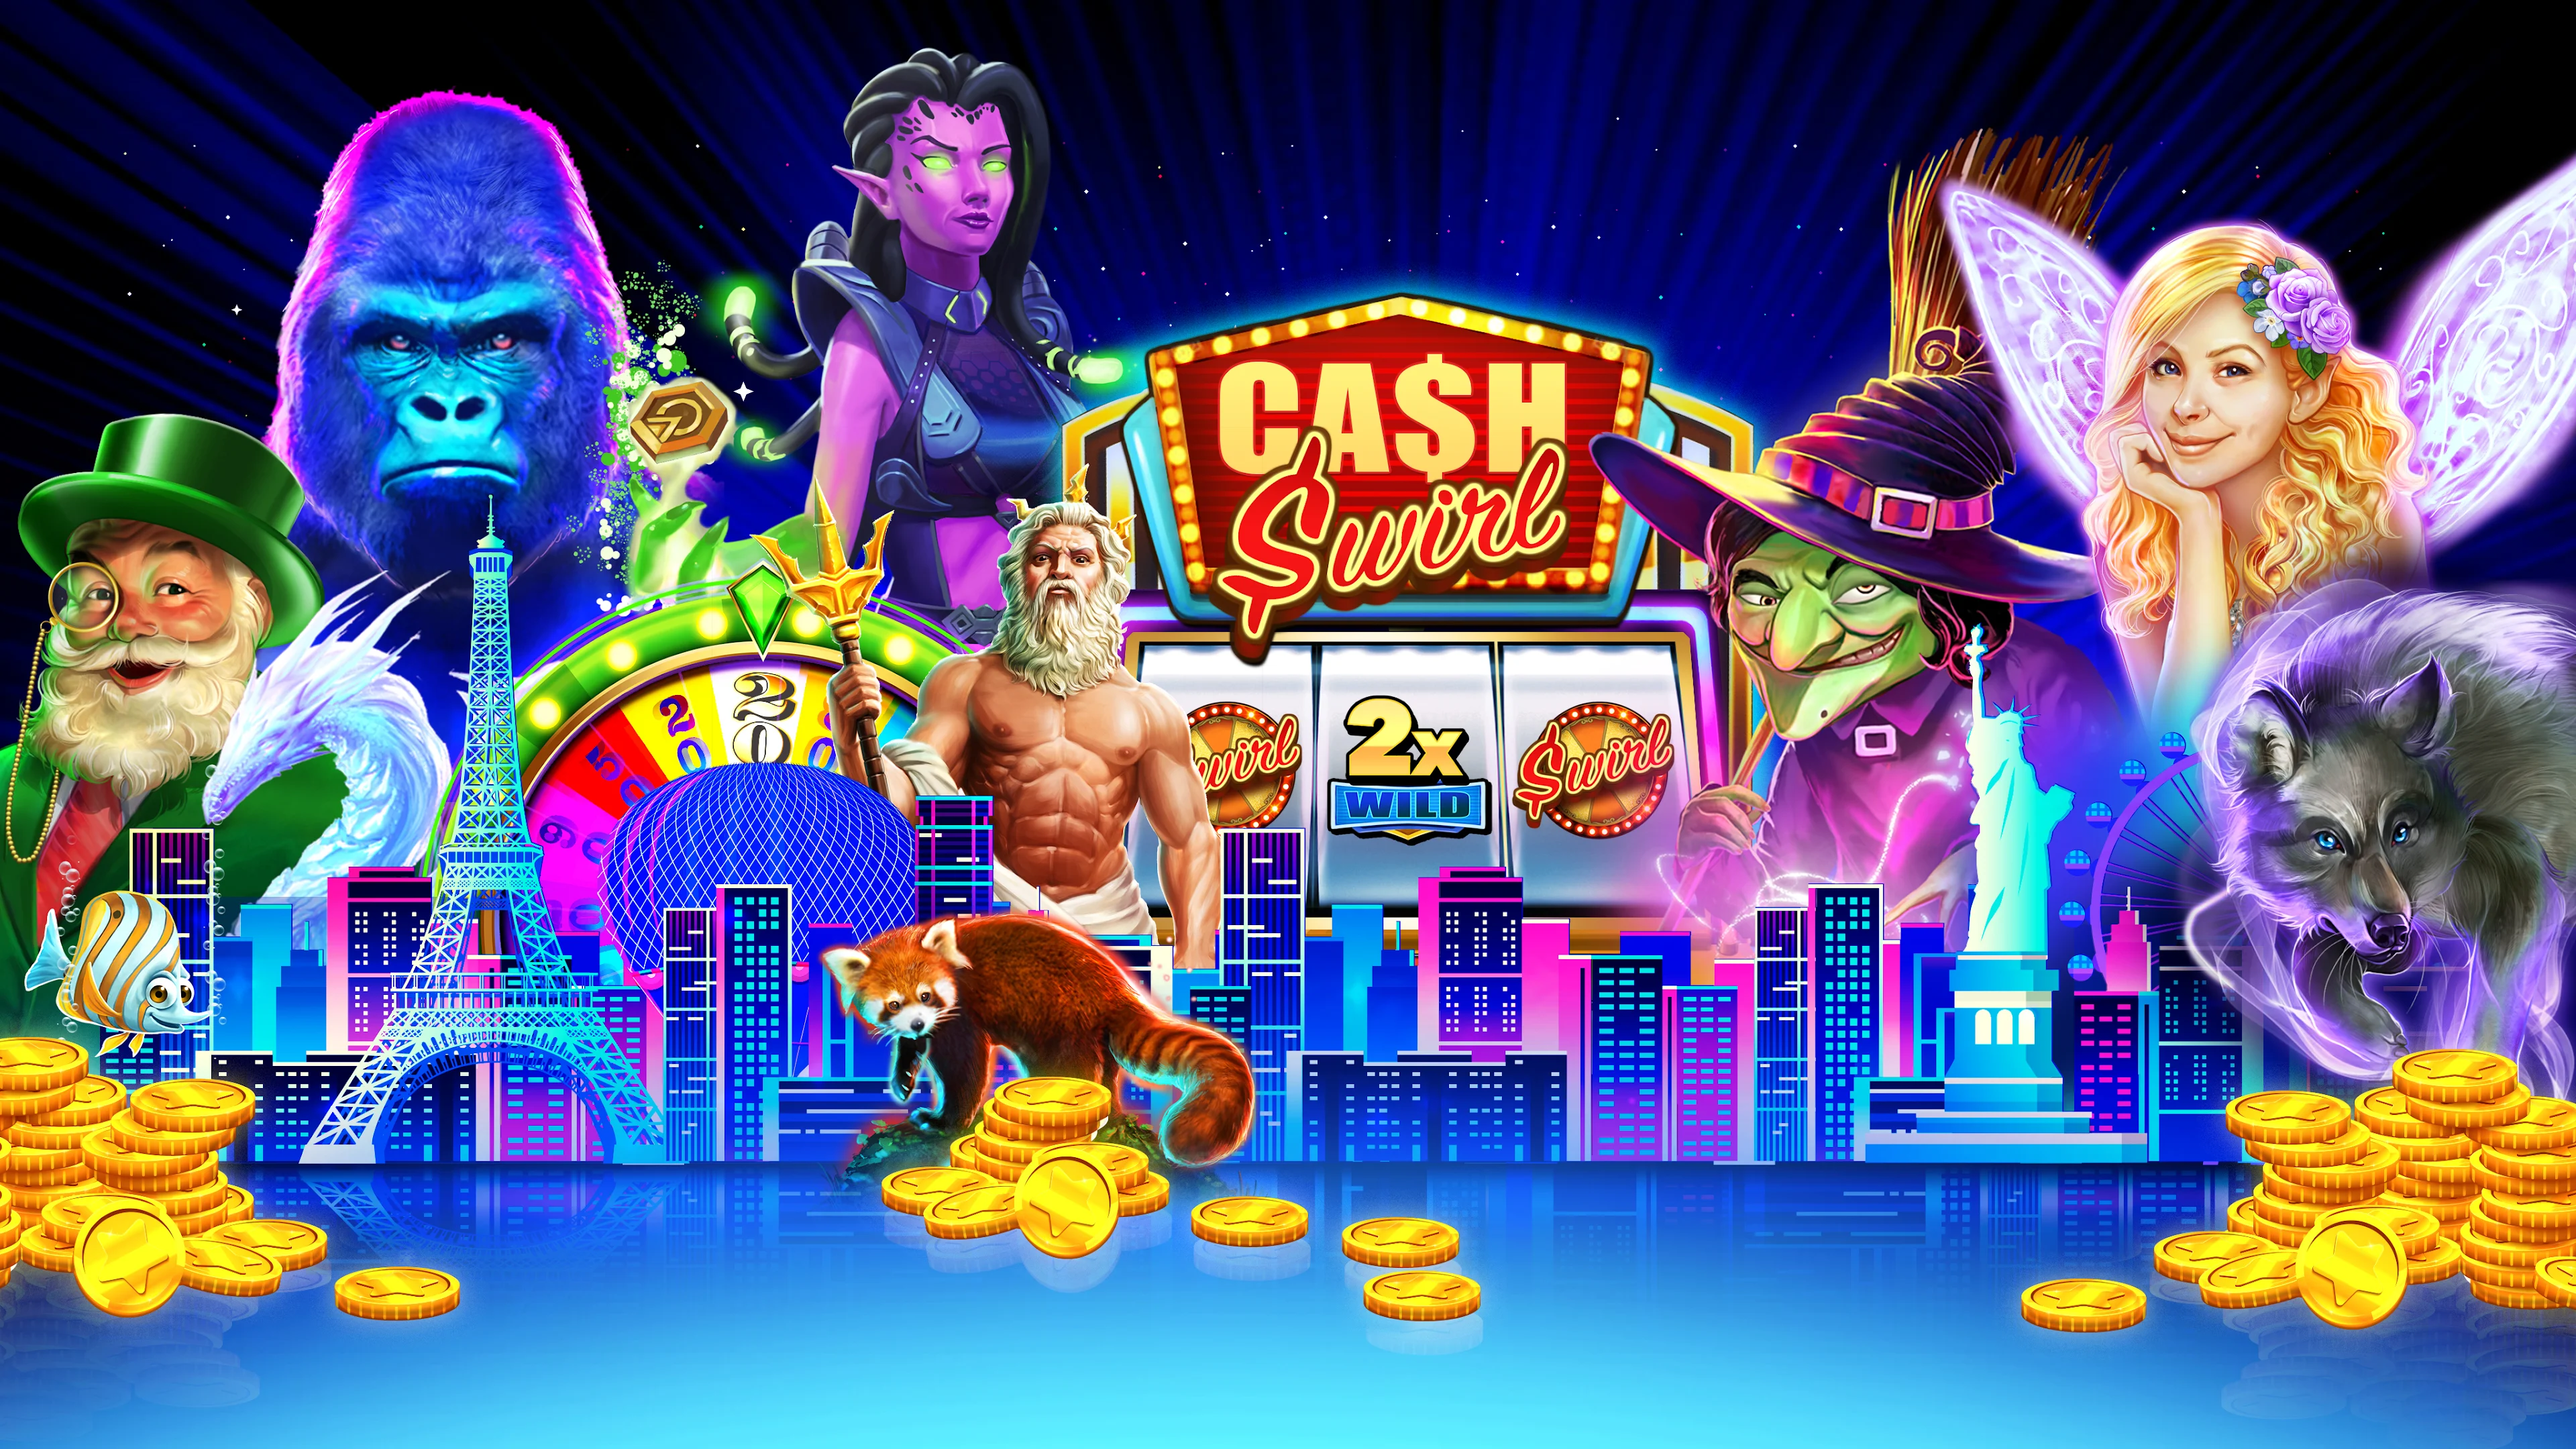 Get Ready for an Intergalactic Gambling Experience with Casino Rocket Slots